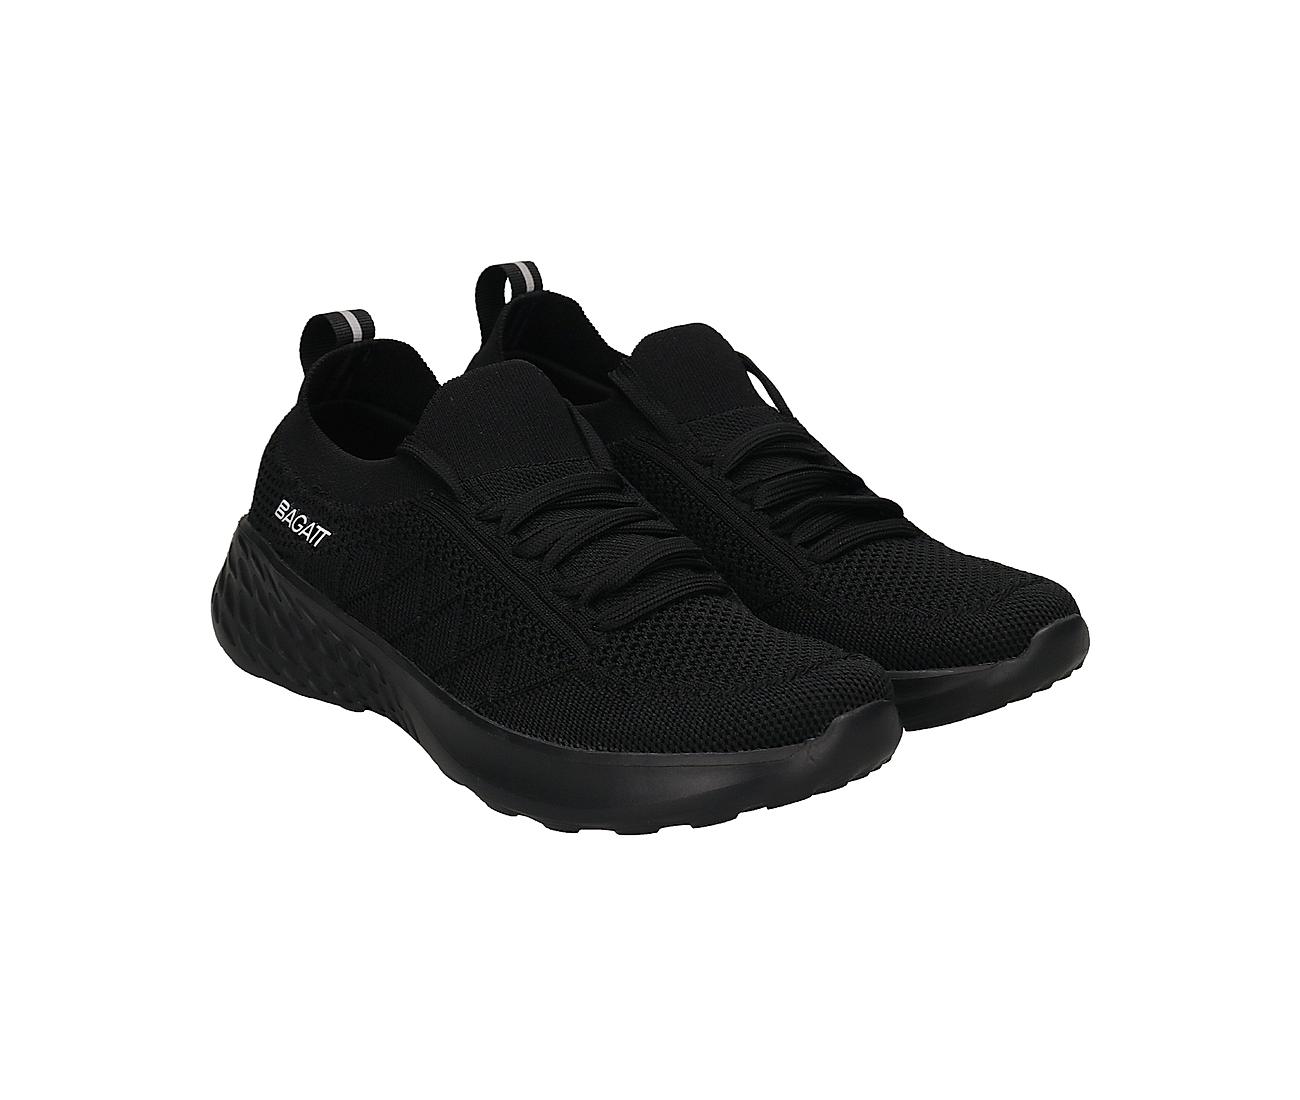 runner Black Sneakers for Women - Fall/Winter collection - Camper India